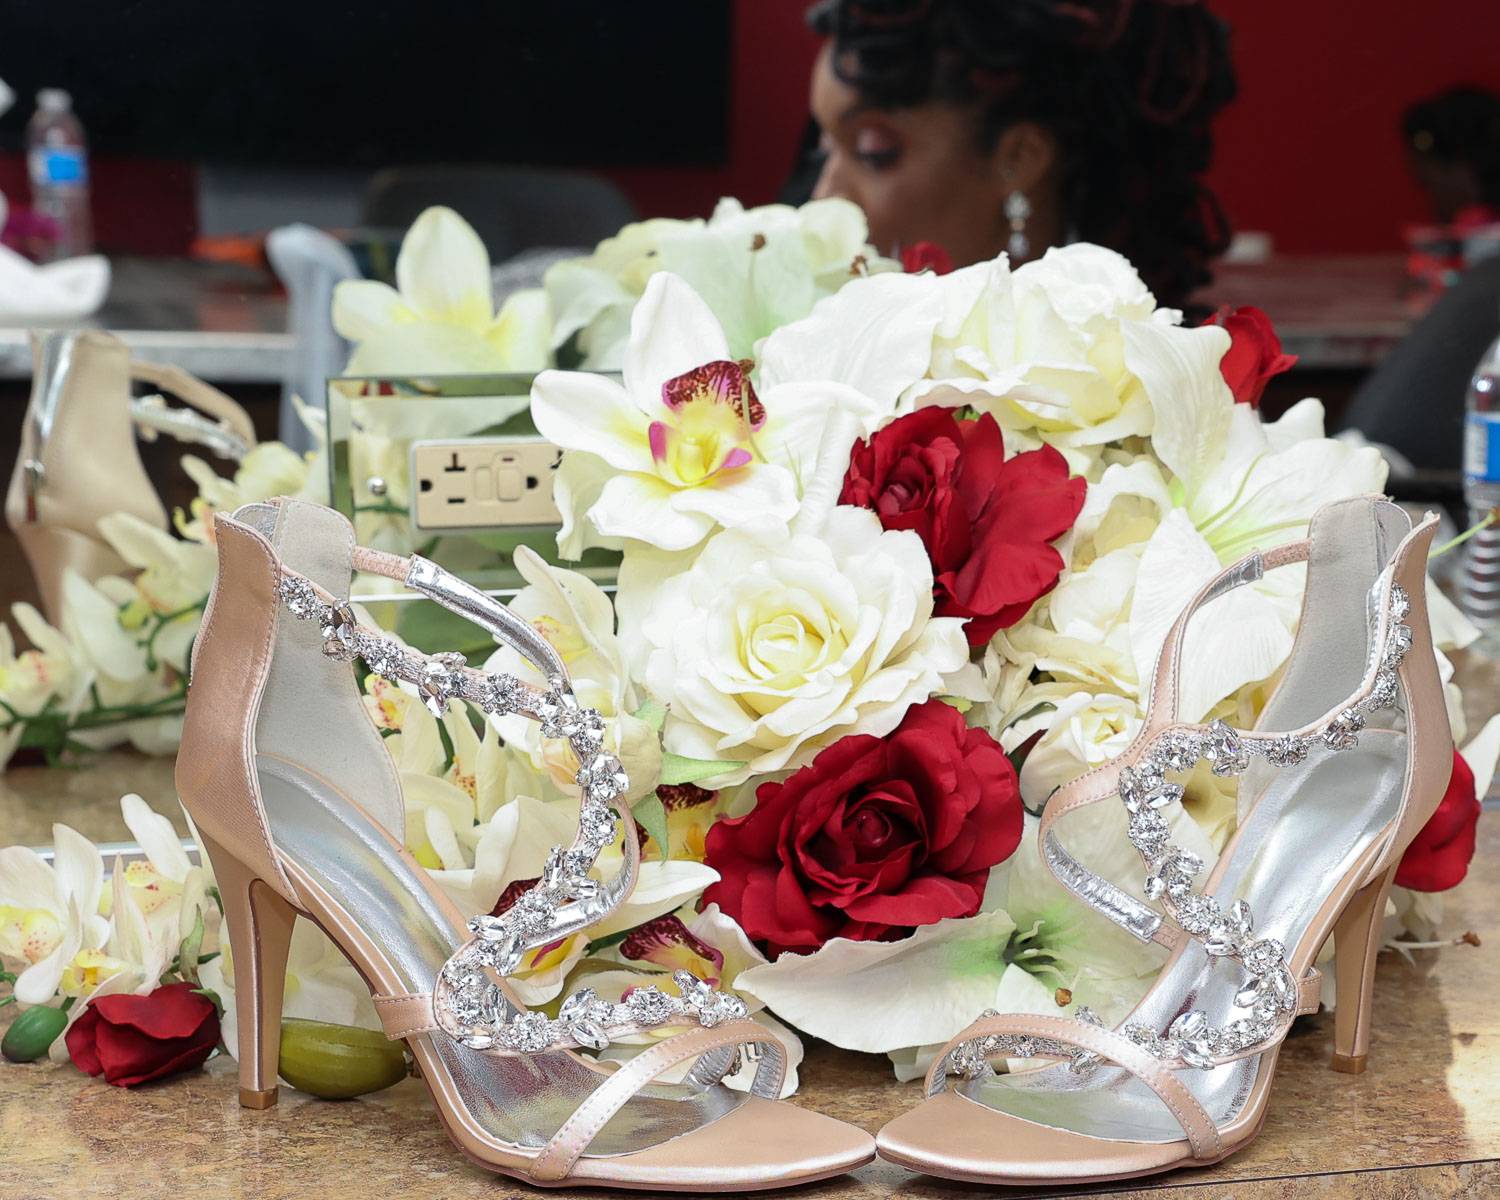 The bride’s jeweled slippers and flower bouquet